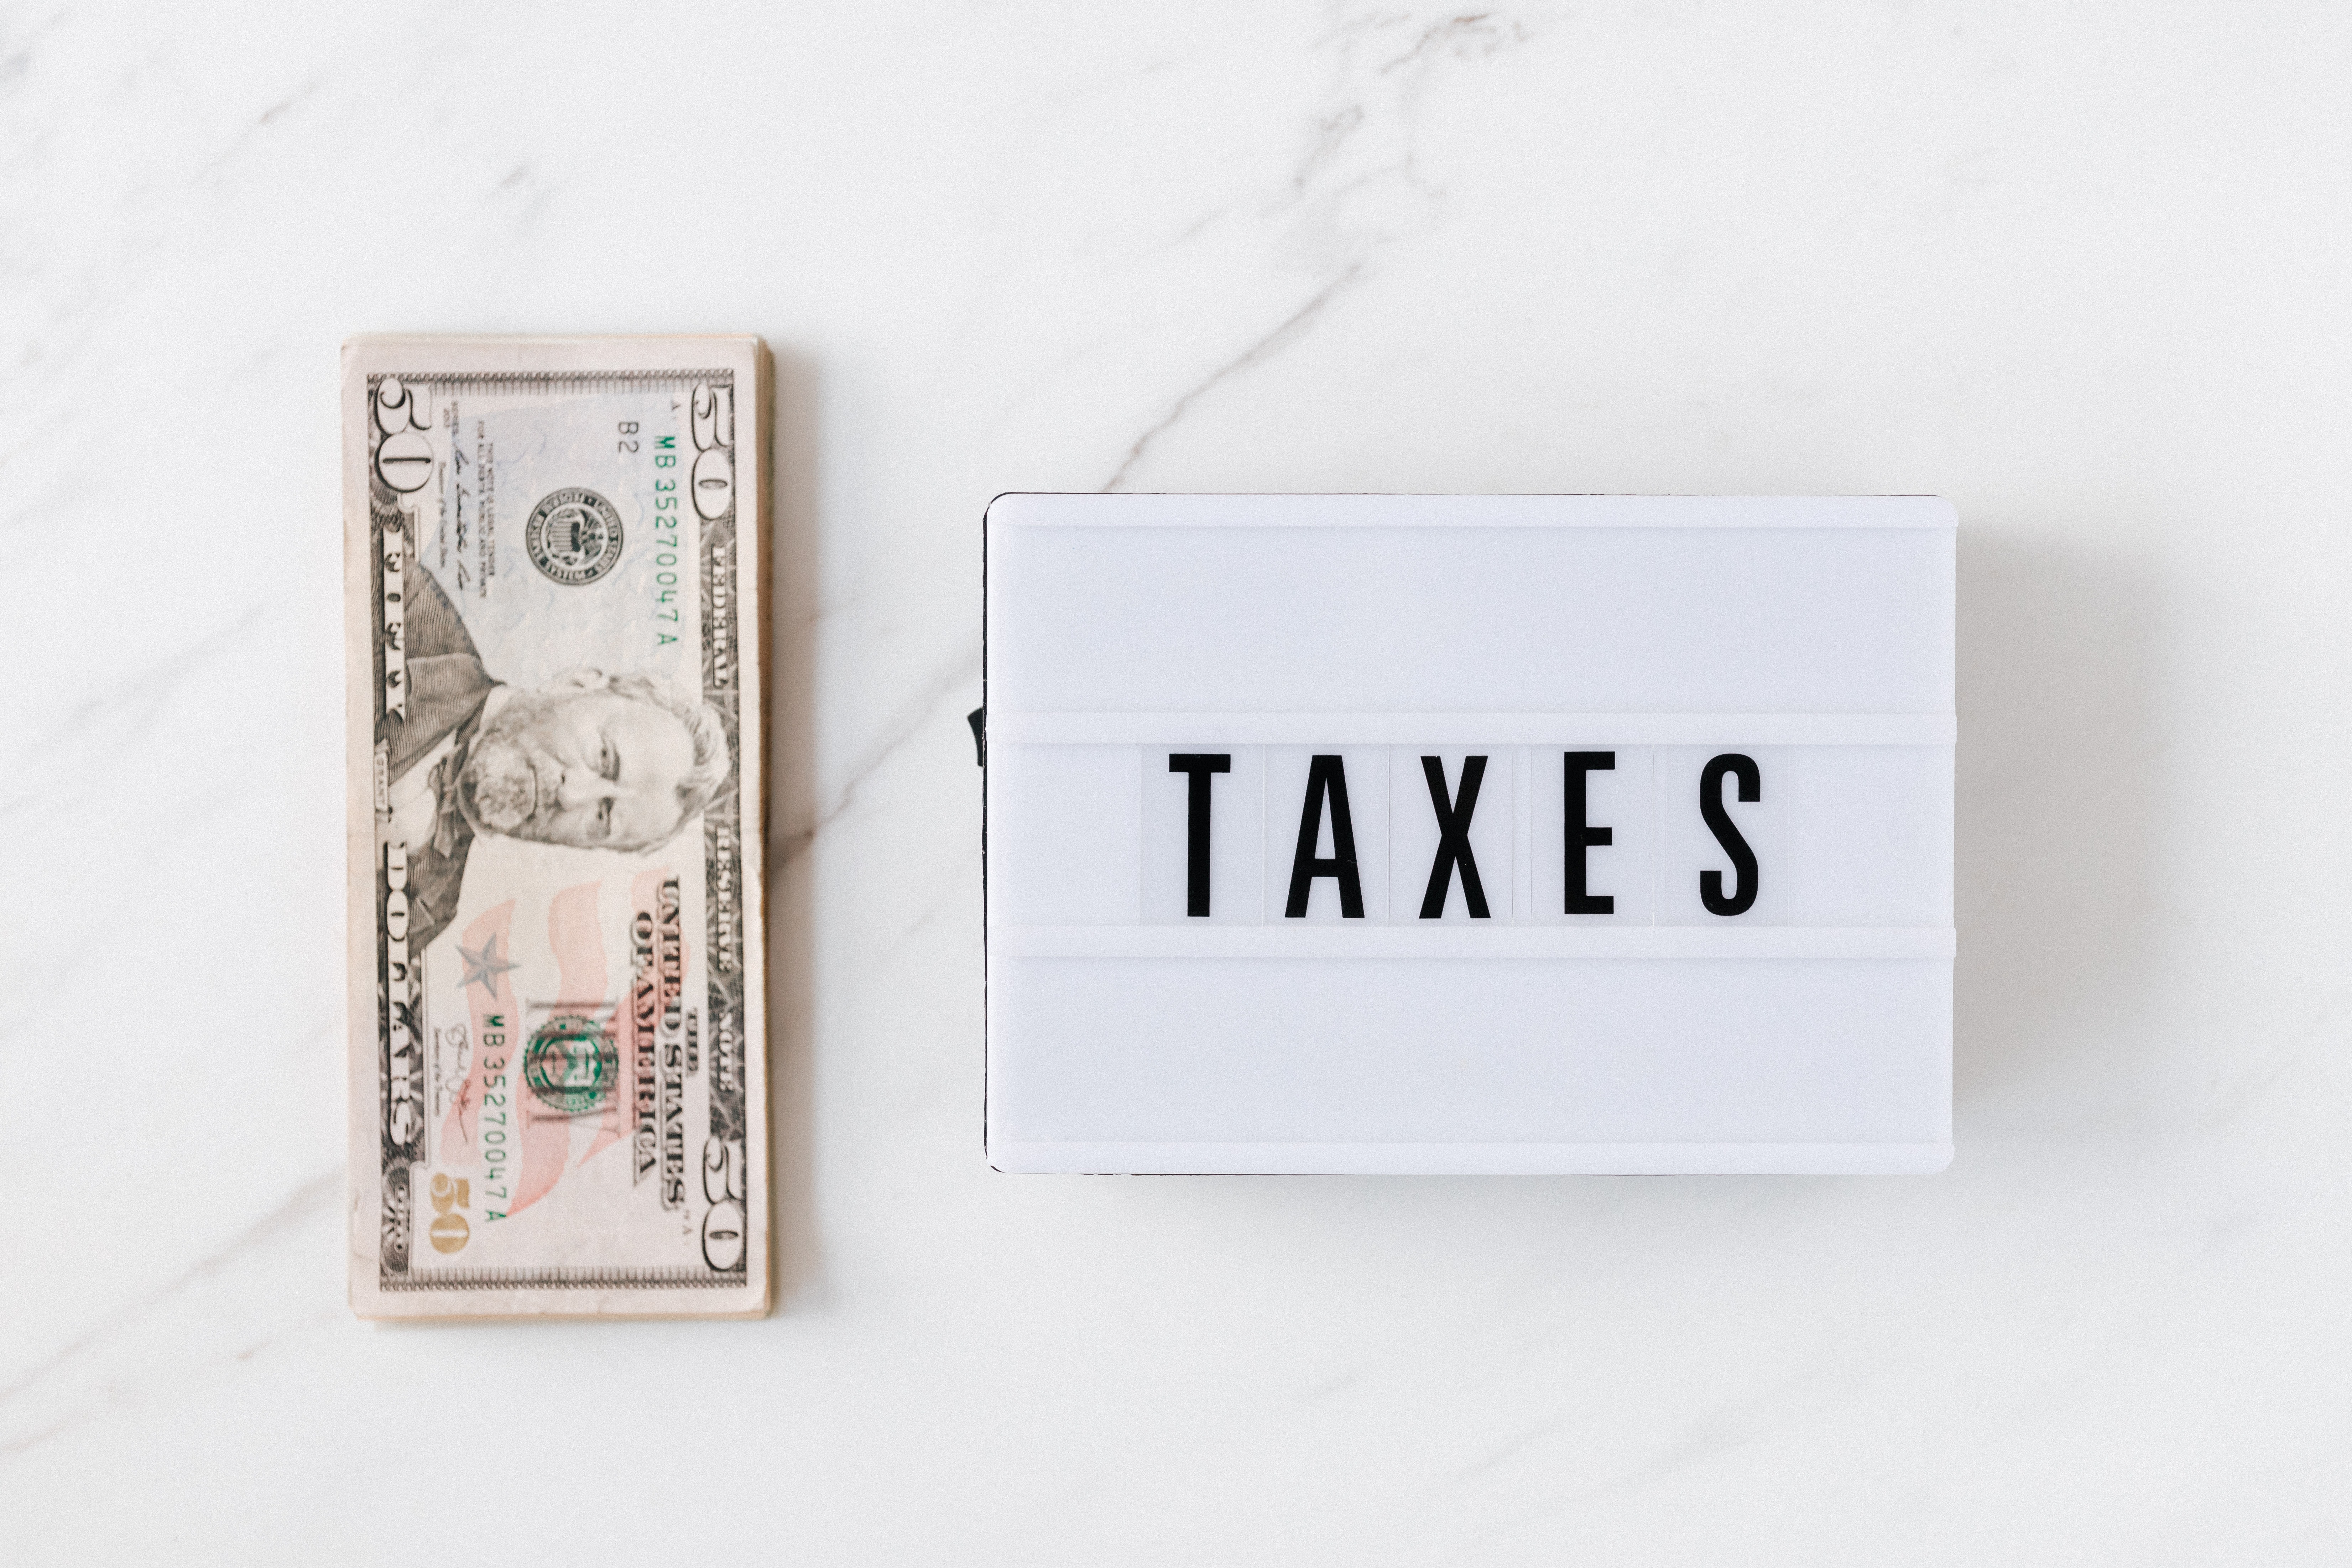 A stack of dollar bills next to a sign that says Taxes on white plastic